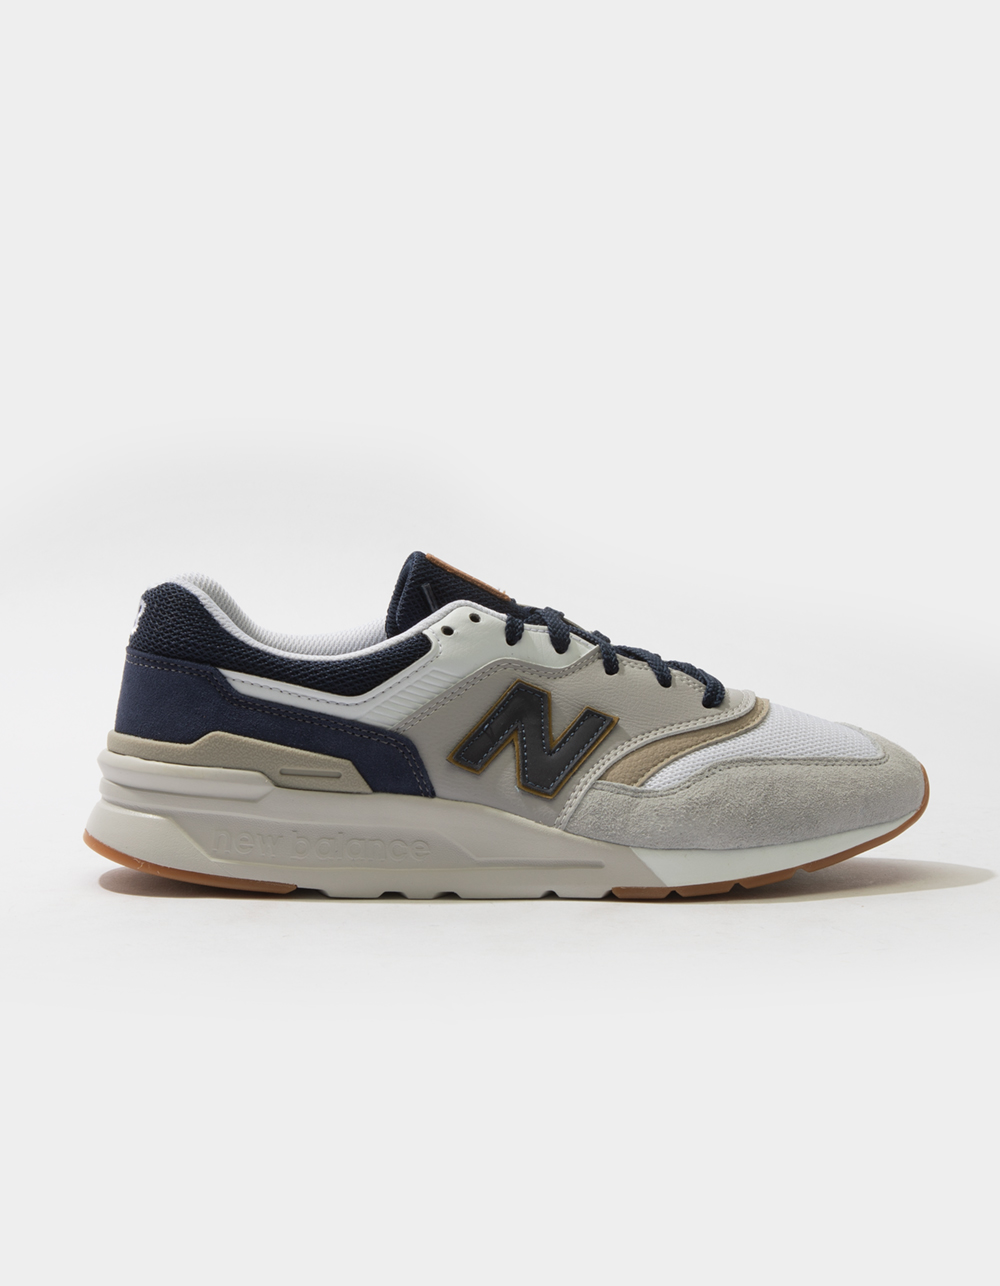 NEW BALANCE 997 Mens Shoes - GRY/NVY | Tillys